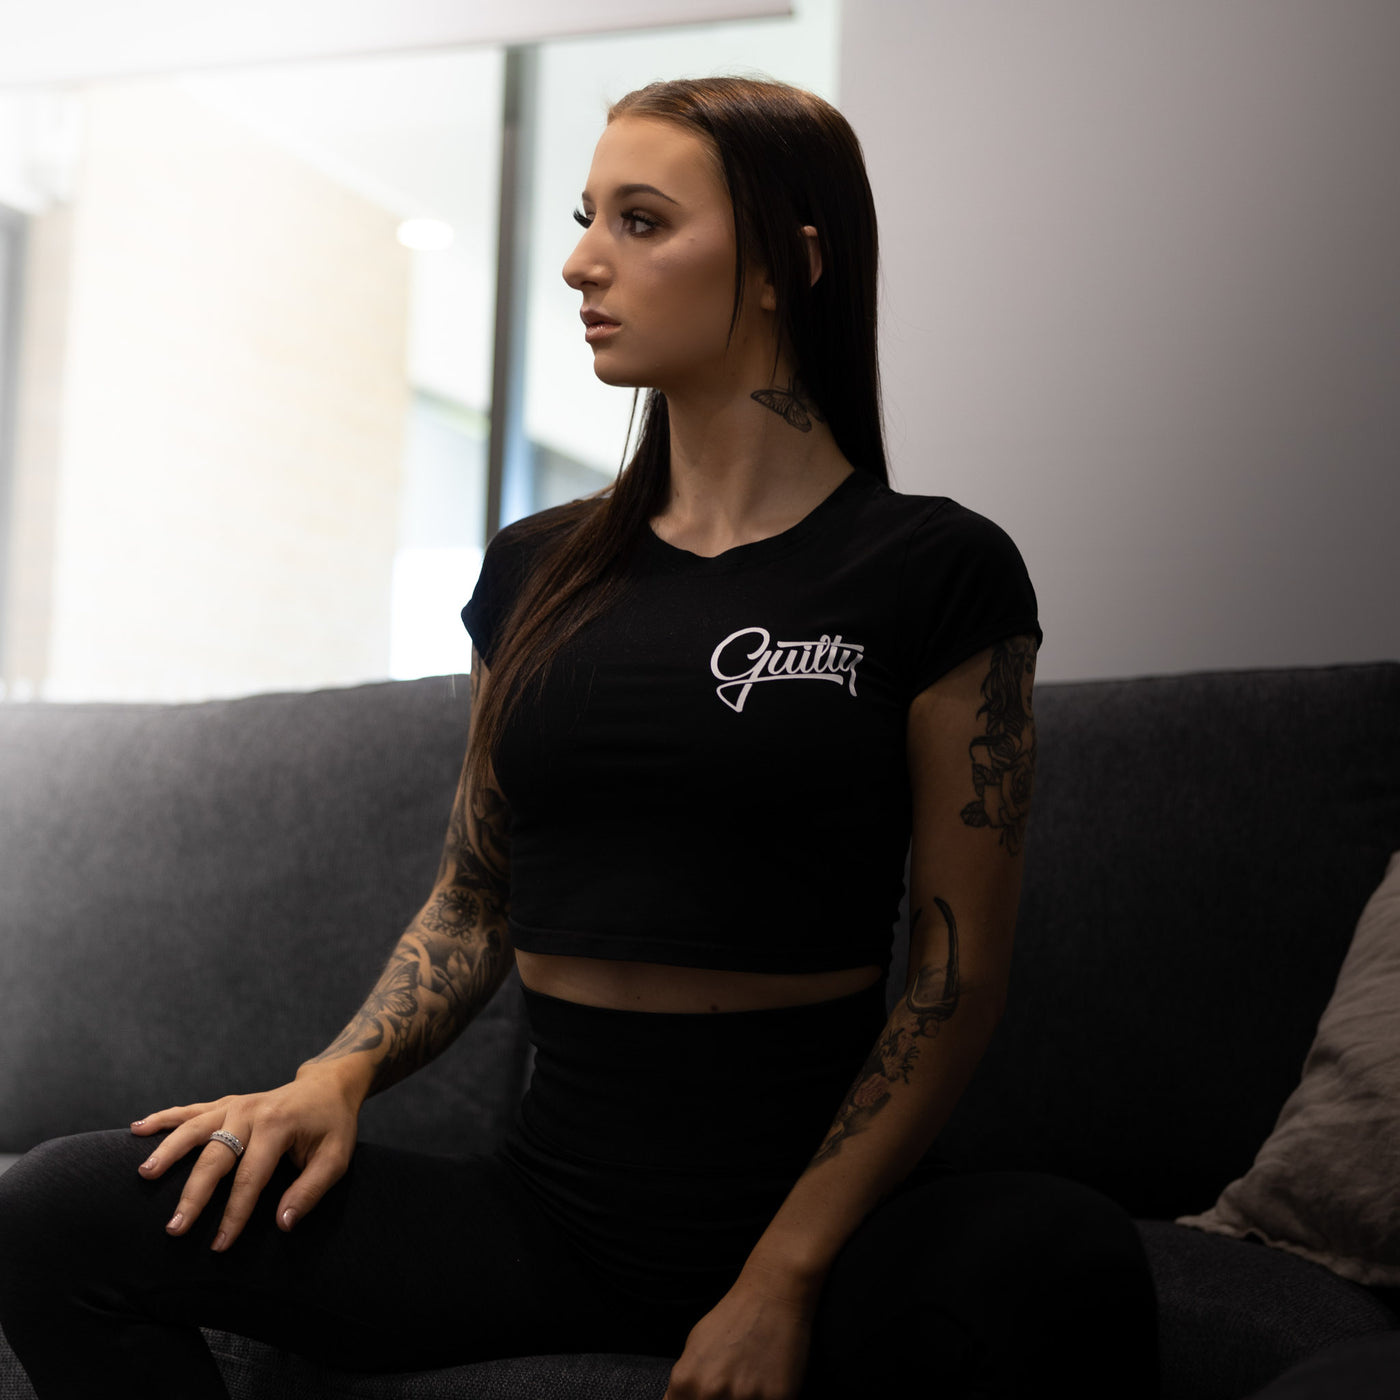 Guilty Crop Tee Black - Women's black crop tee by Guilty Apparel, perfect for action sports and adventure